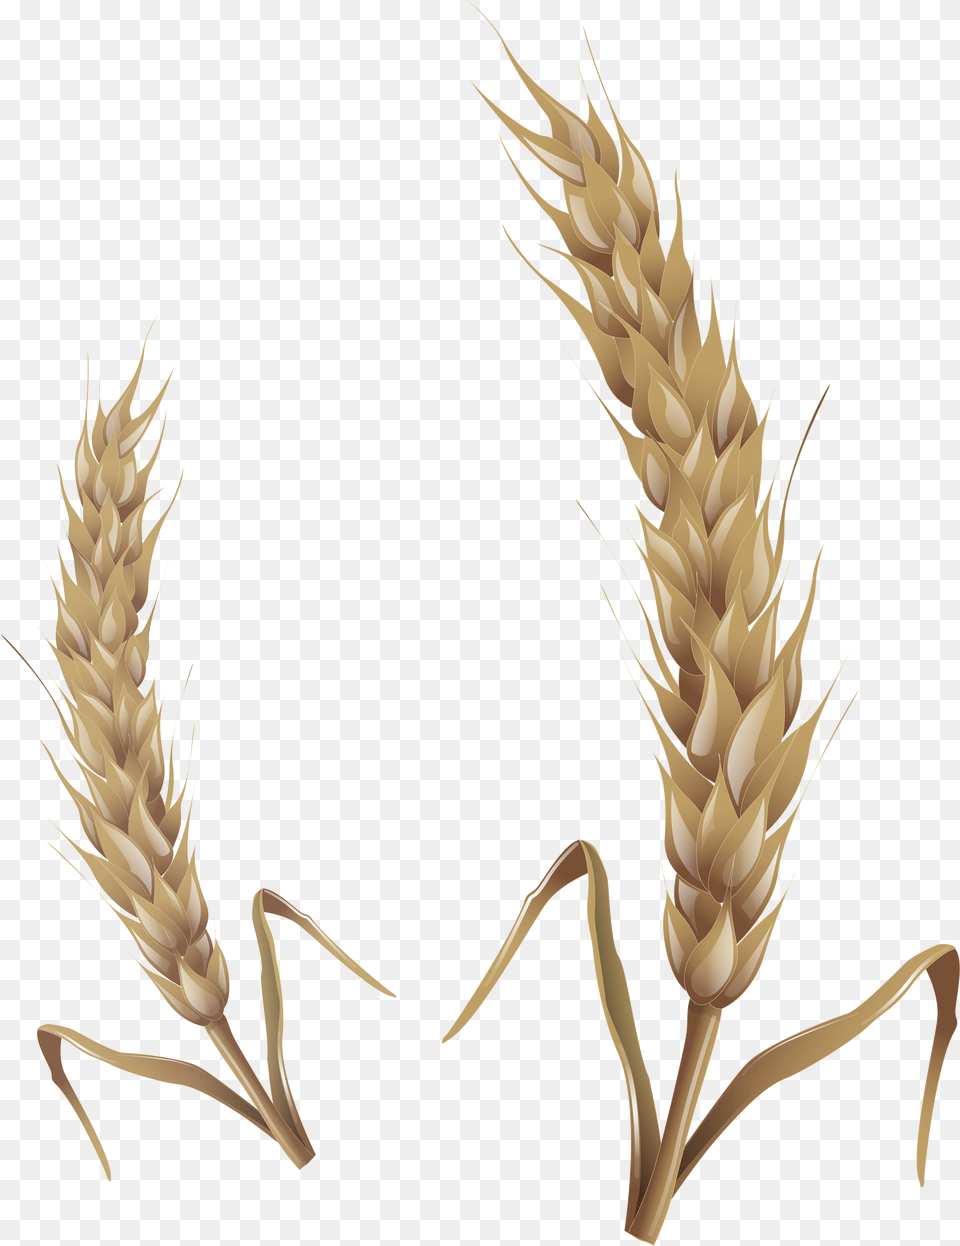 Wheat Wheat Stalk Food, Grain, Produce, Chandelier Free Transparent Png